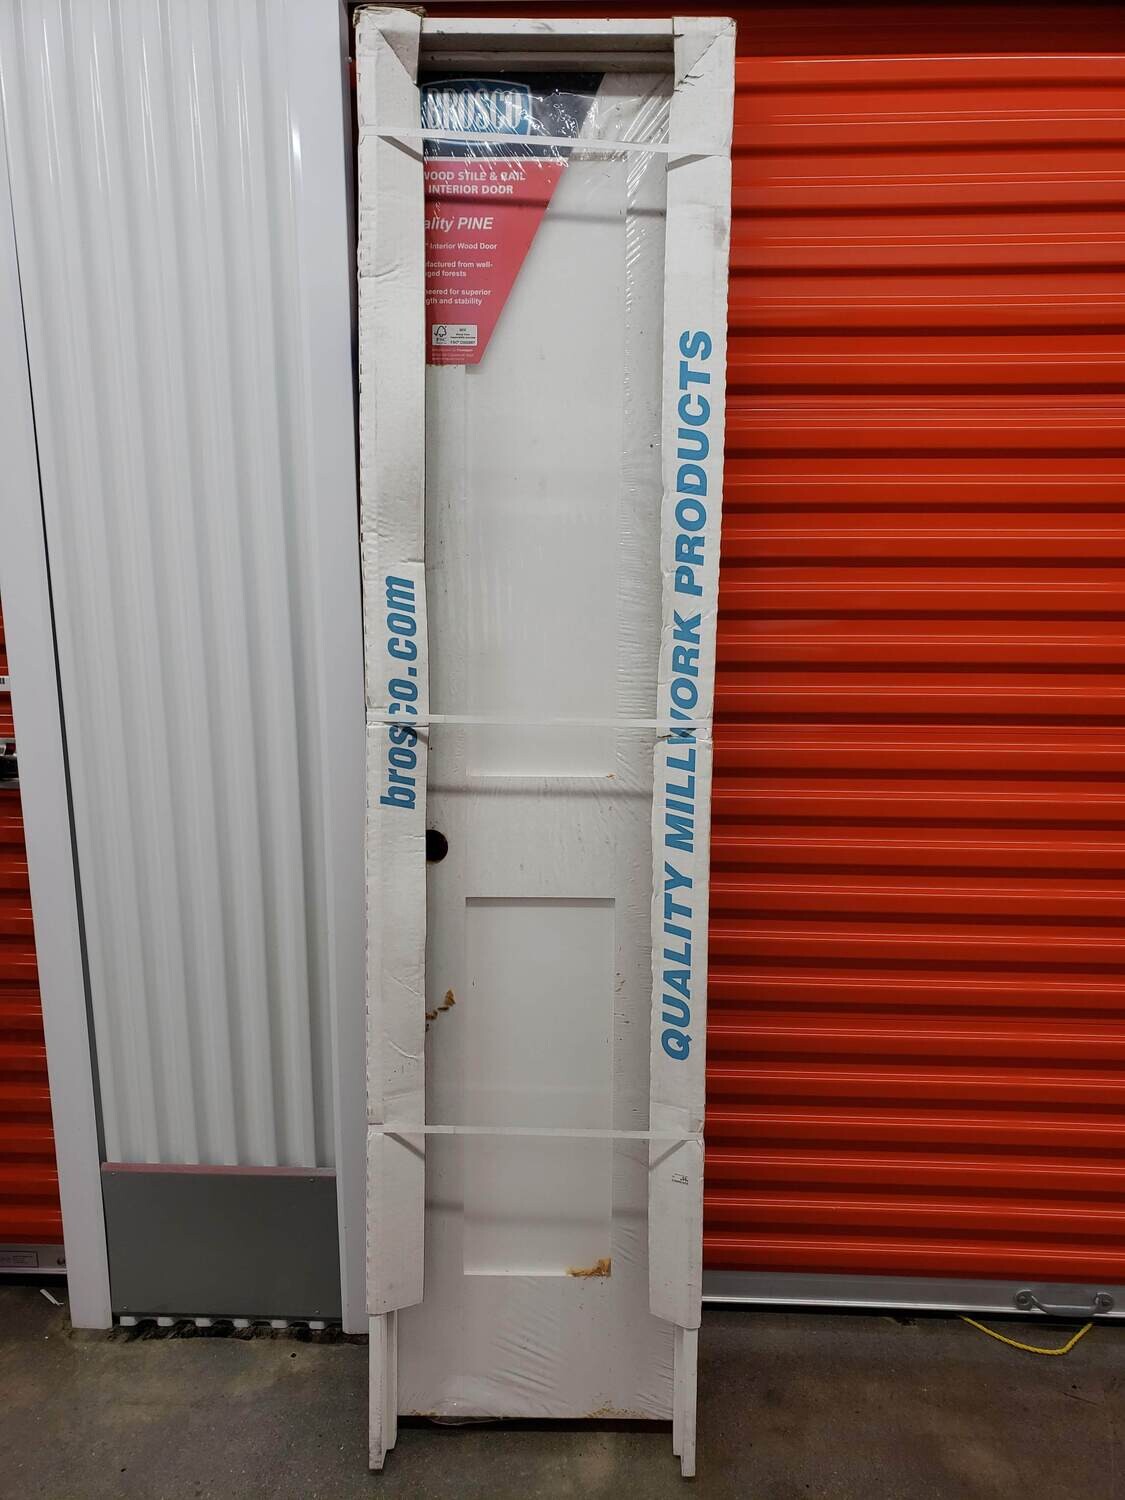 New Interior Prehung RH Door, 18x80, no trim (SD2) #1148 ** 7 mos. to sell, clearance